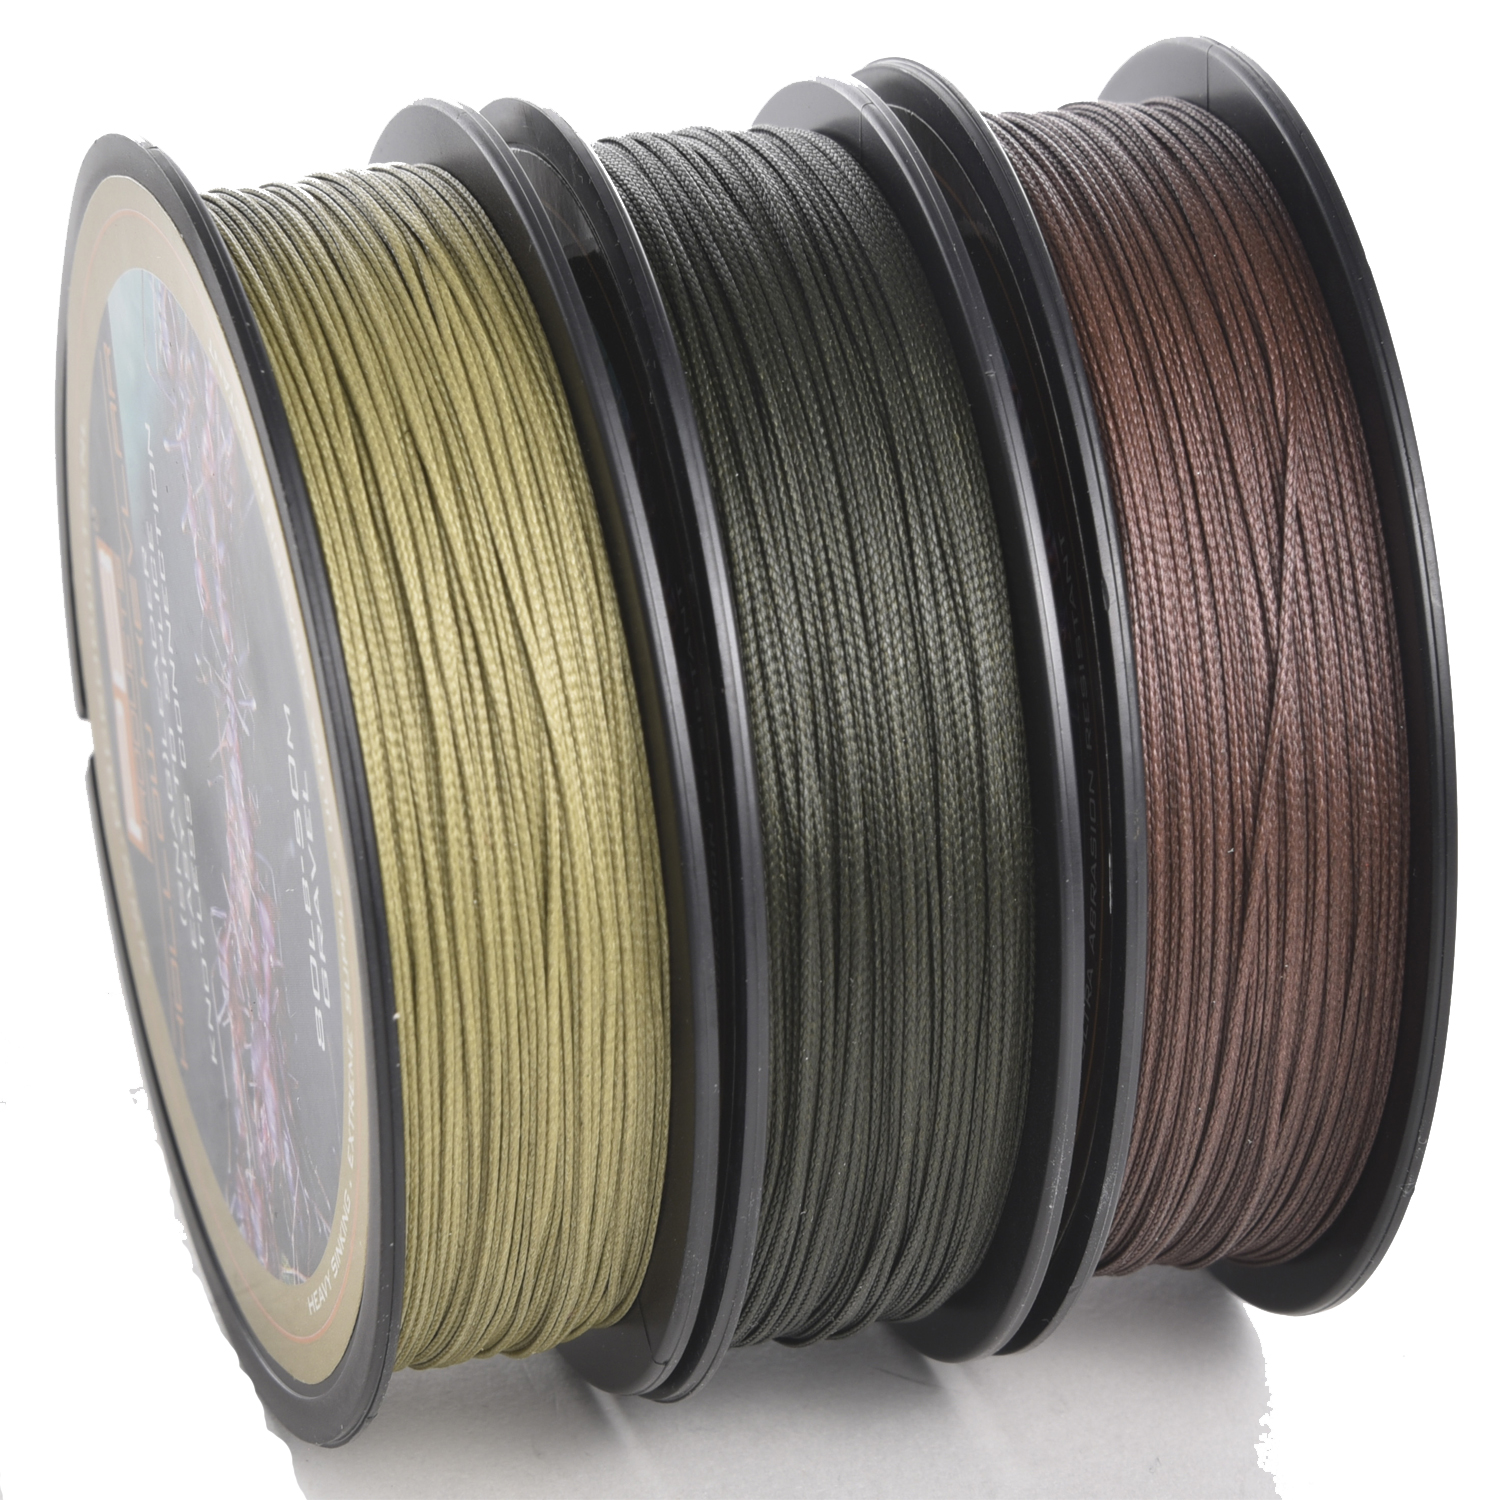 Kevlar Fishing Line - What Is It + Tips, Review and Comparison